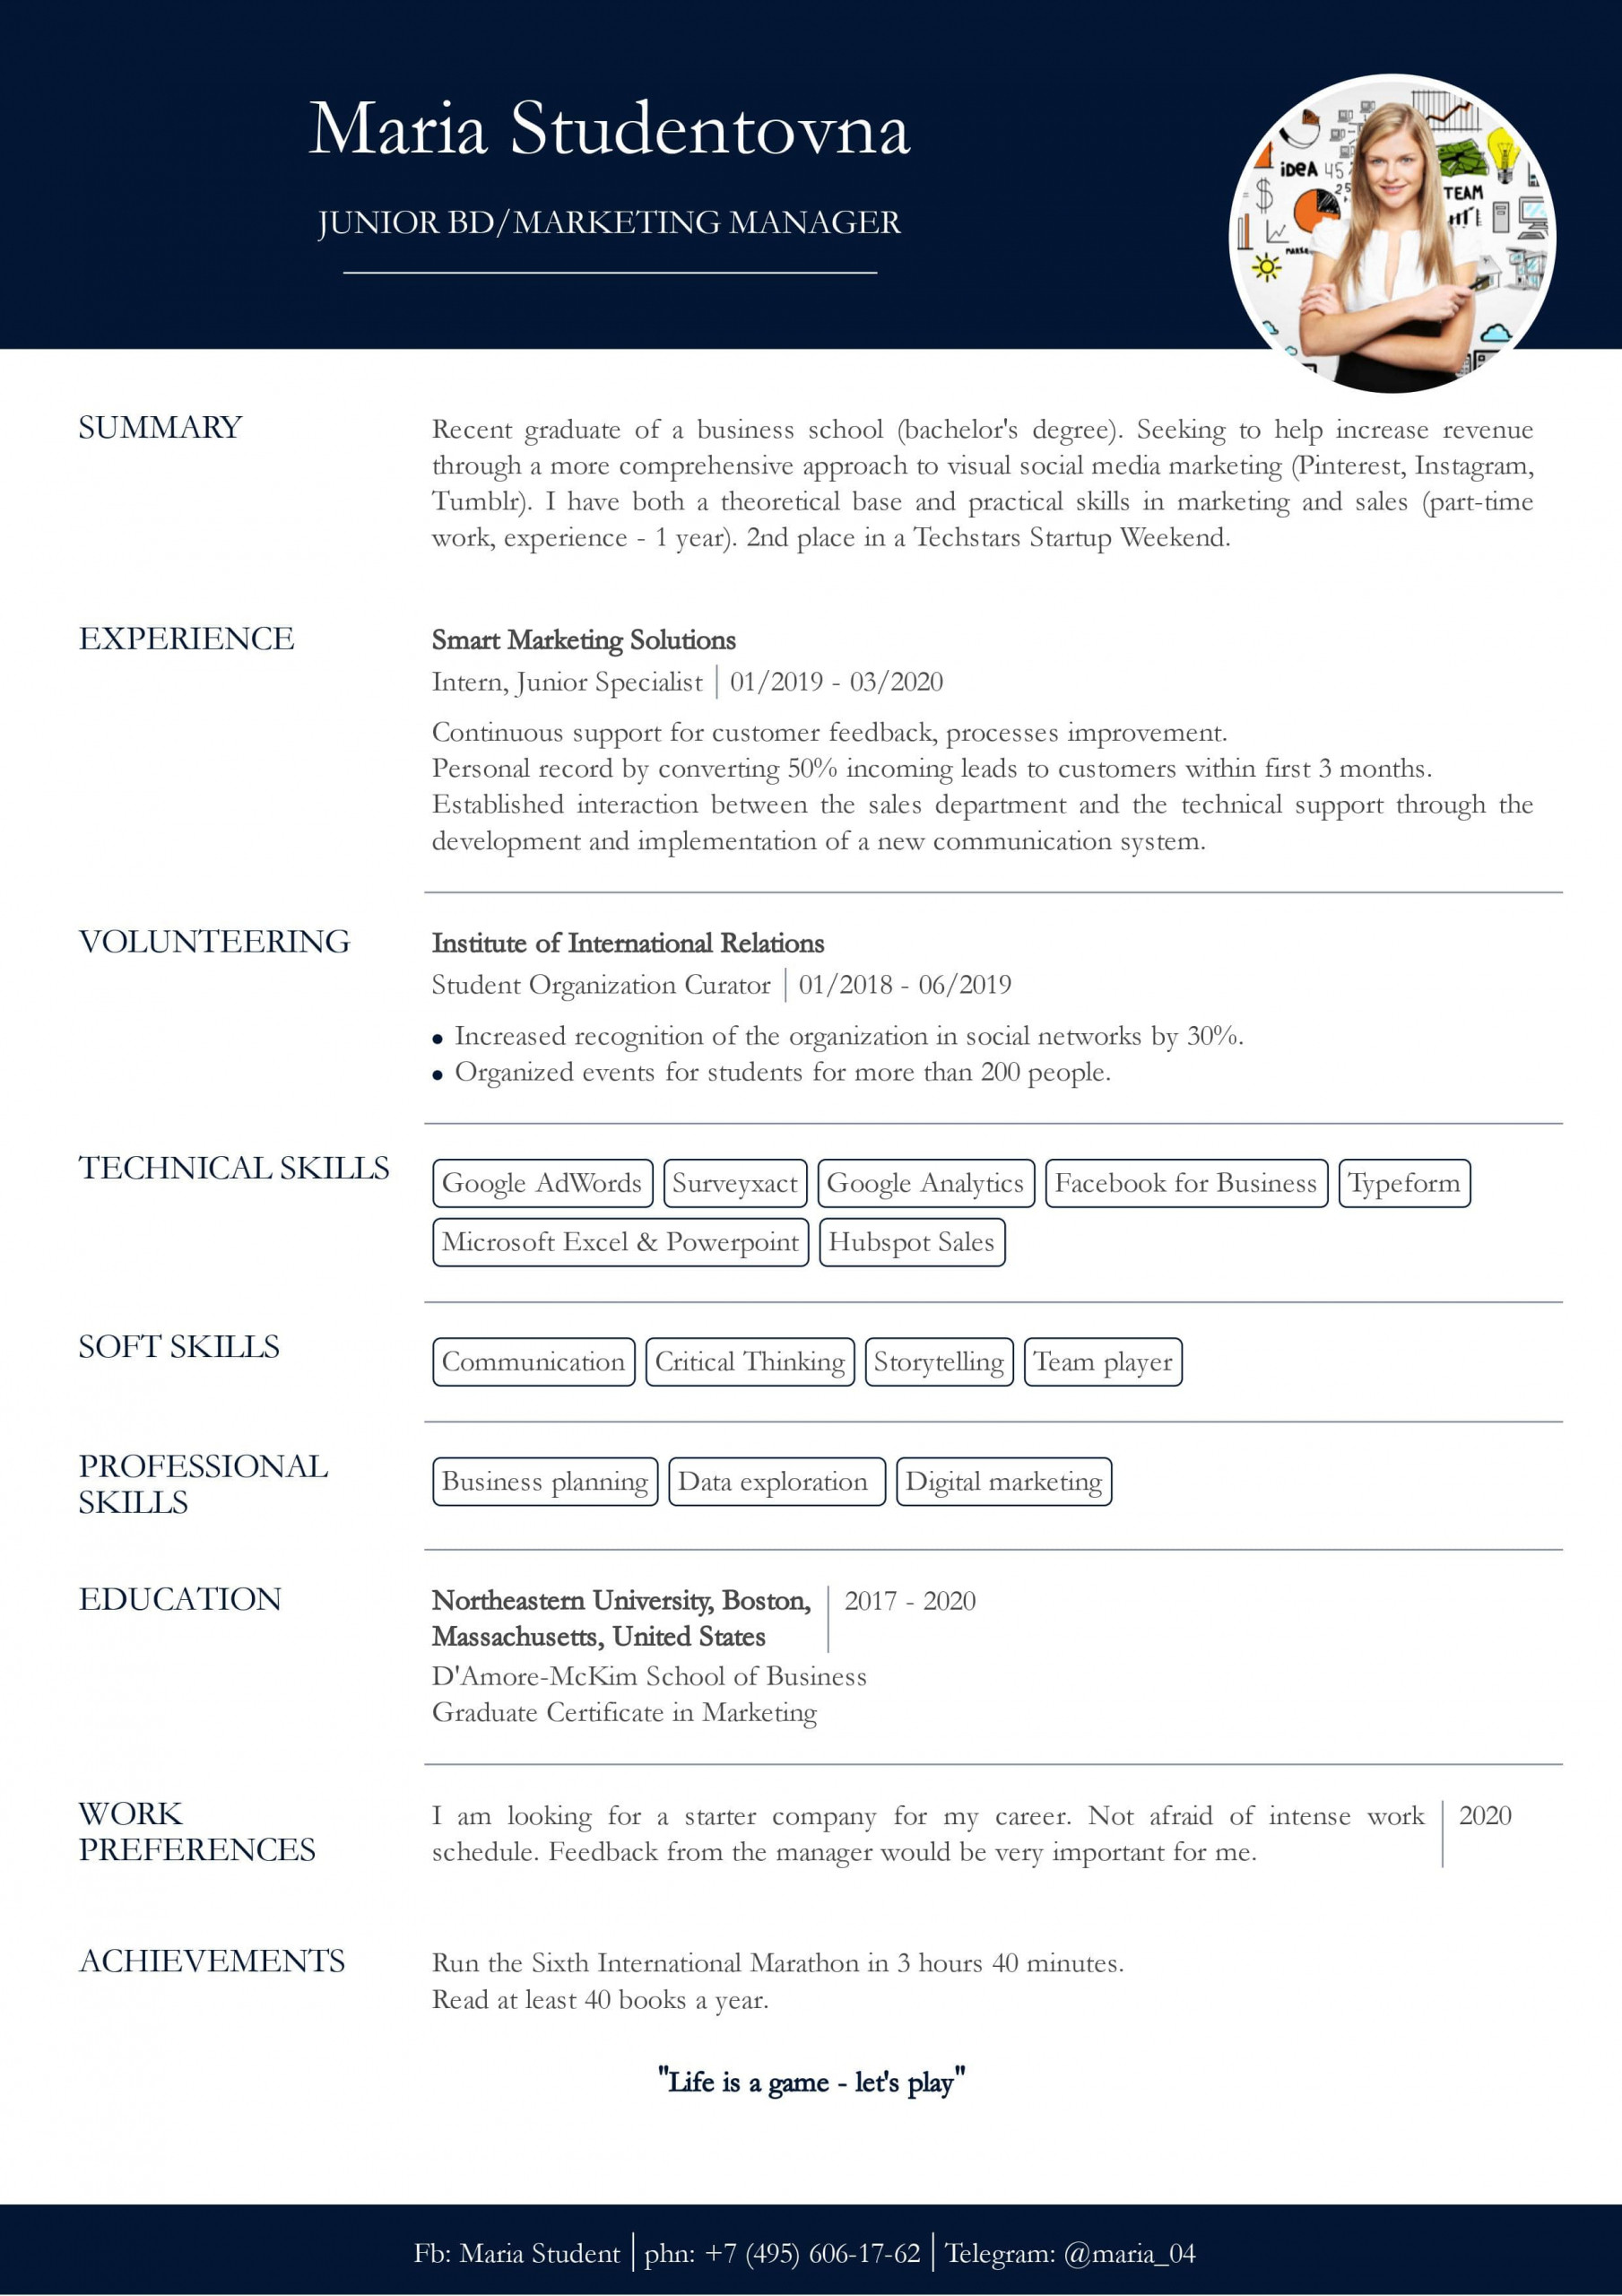 Resume Template for someone without Work Experience Resume with No Work Experience. Sample for Students. – Cv2you Blog